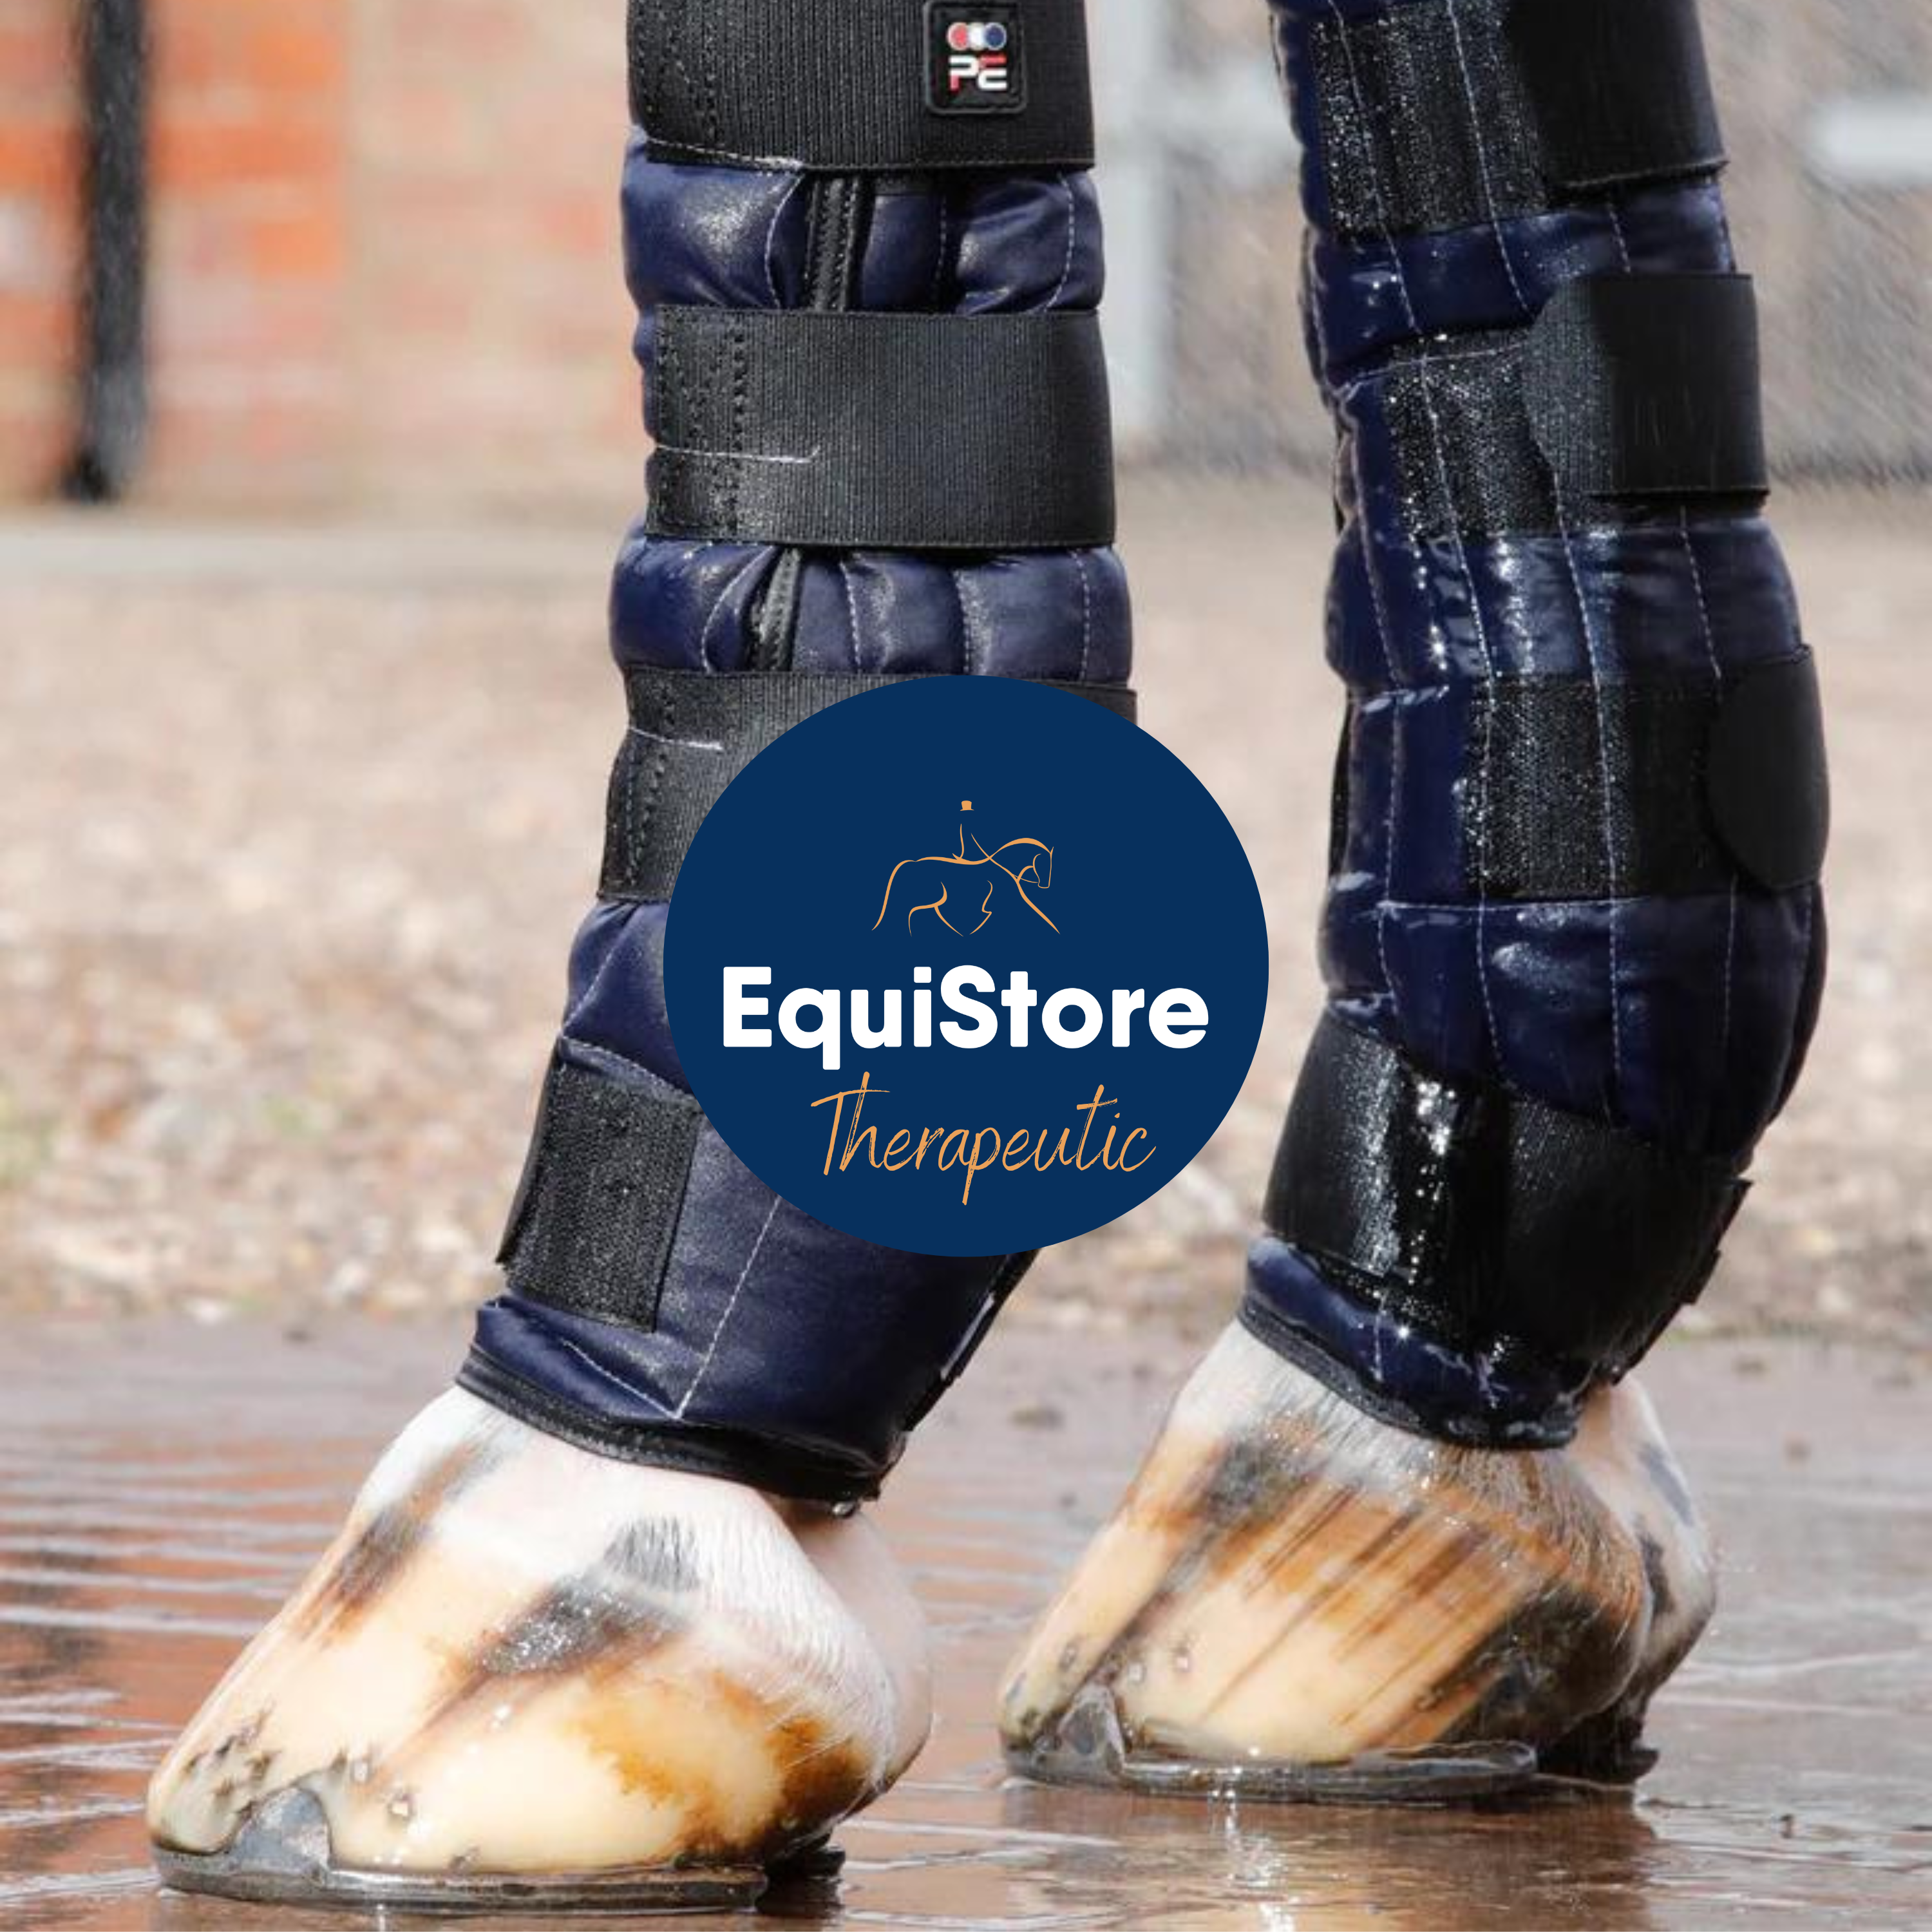 A range of therapeutic products for horses, available at EquiStore in Ireland.